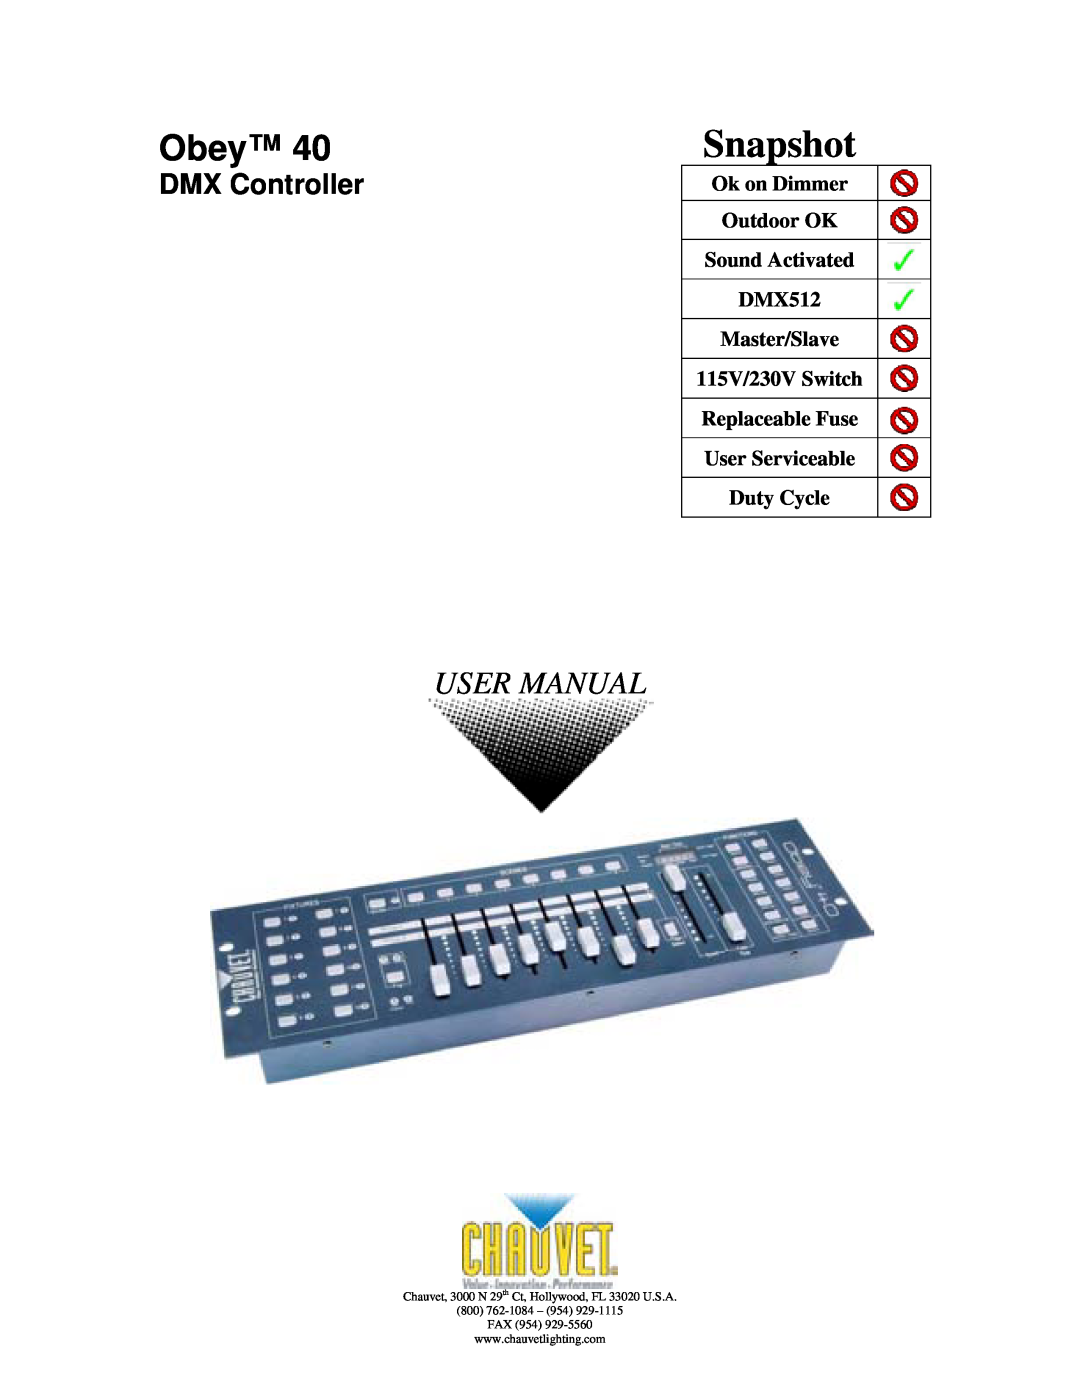 Chauvet DMX512 user manual Snapshot, SX Mix, Ok on Dimmer, Outdoor OK, Sound Activated, 115V/230V Switch, Replaceable Fuse 